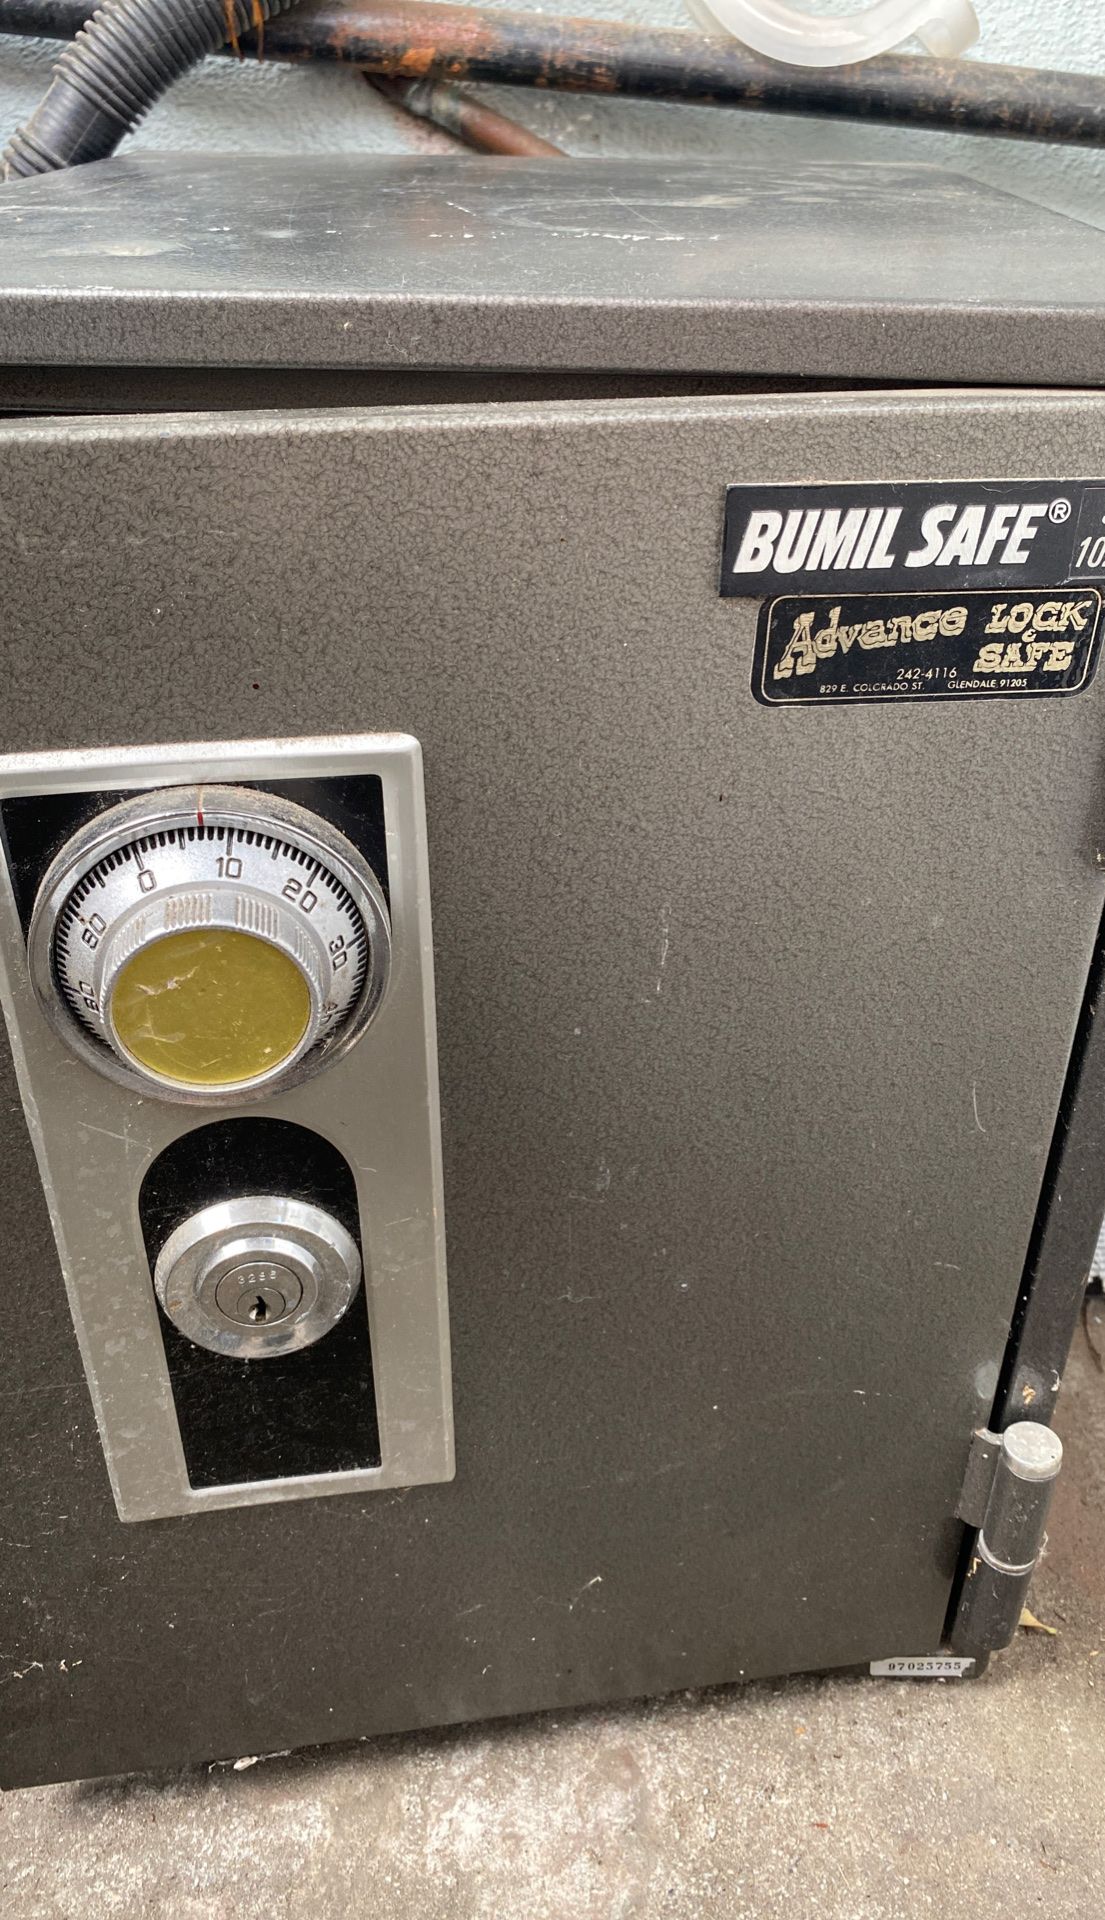 Small safe extra keys and bolt down kit